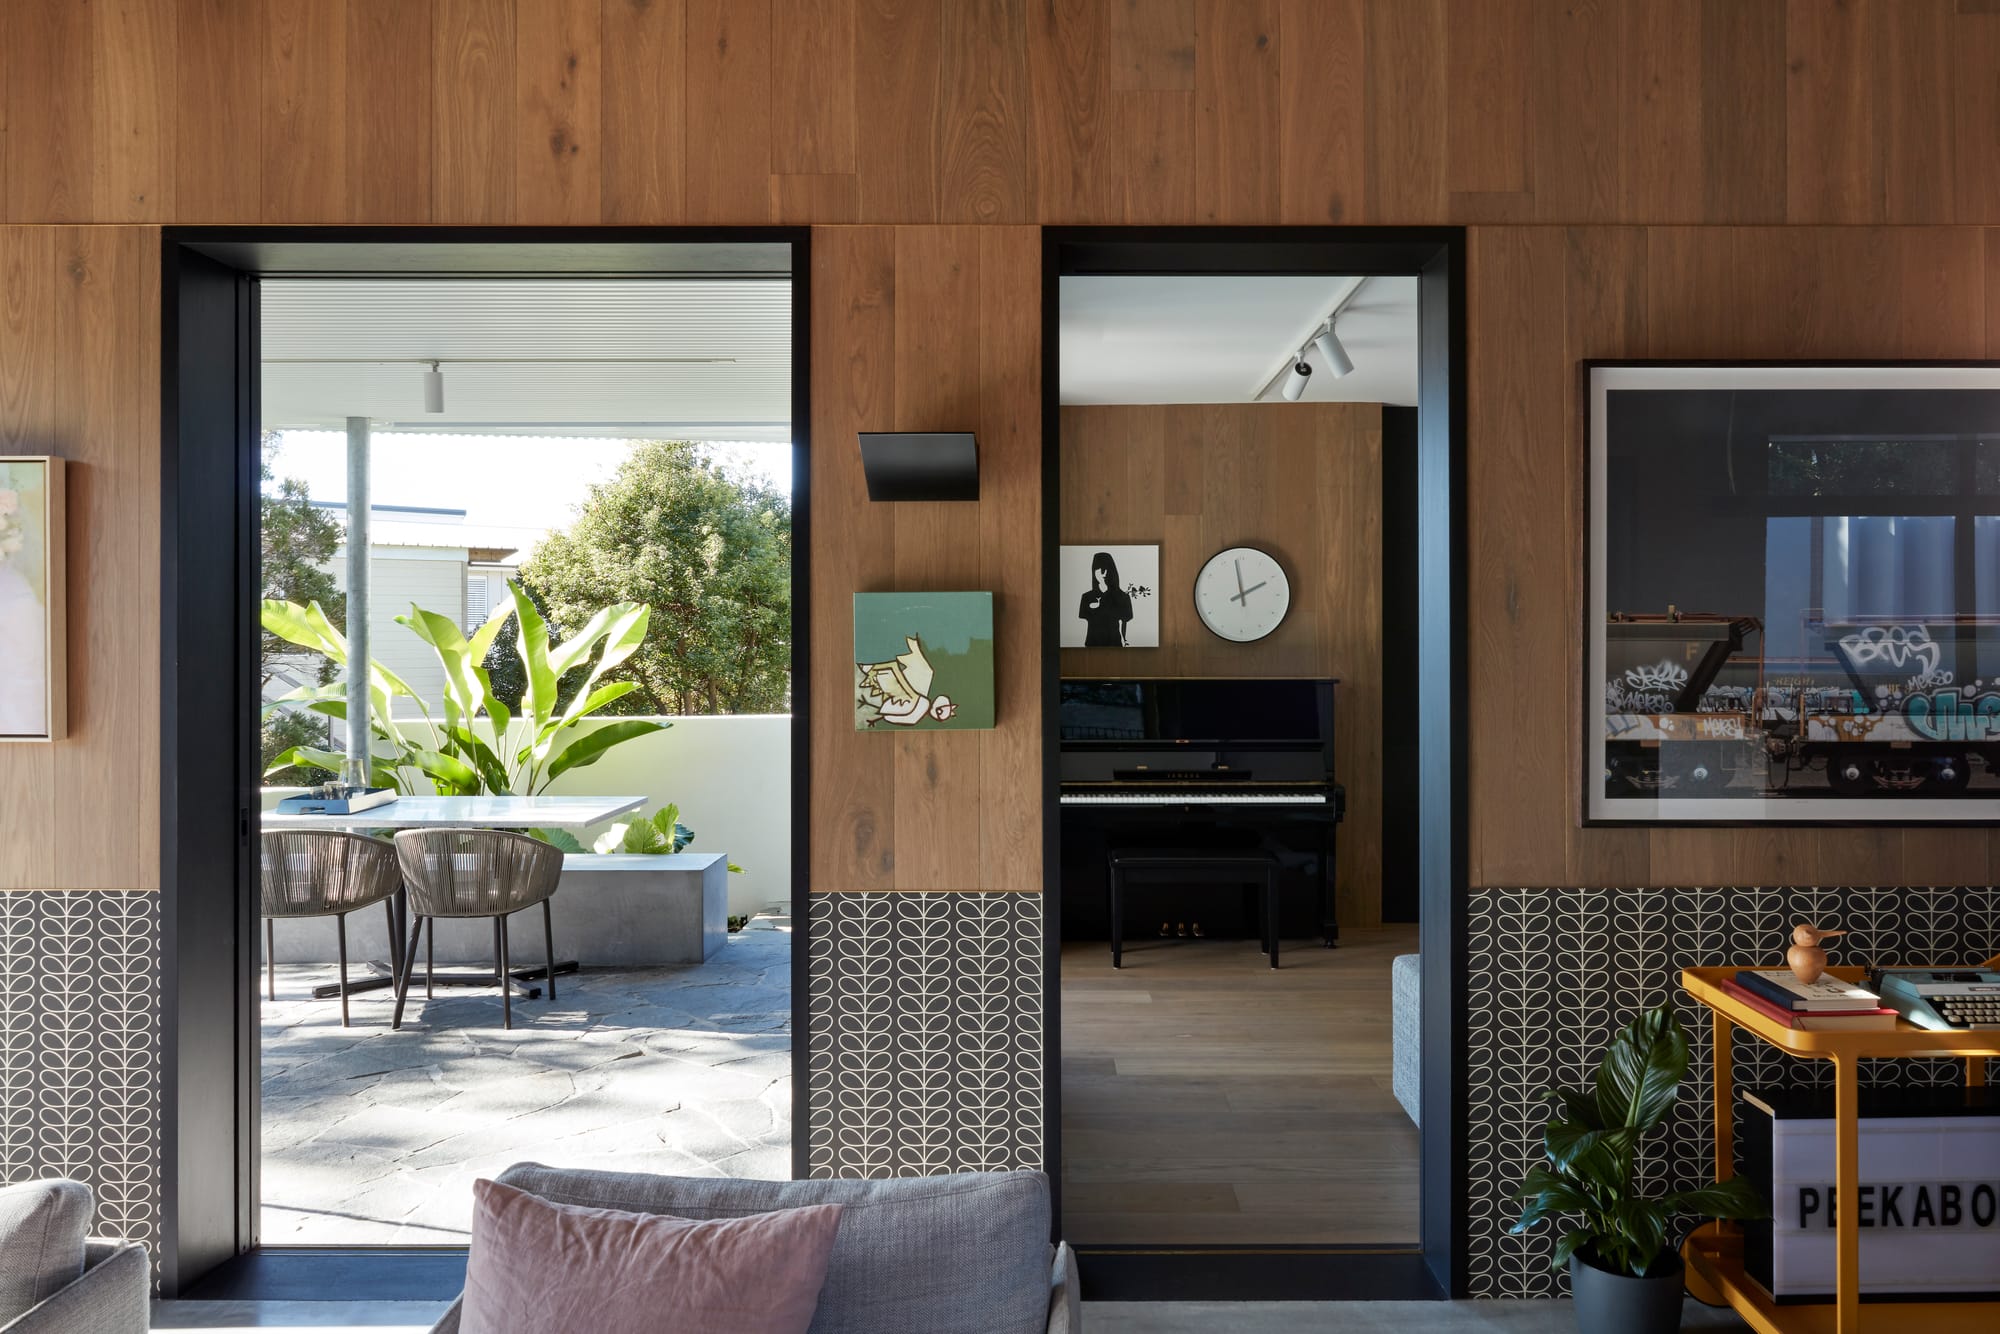 Uxbridge House by Tim Stewart Architects. Photography by Christopher Frederick Jones. Interior of home with wood panelled walls. One door leading to room with a black piano and one door leading to courtyard.